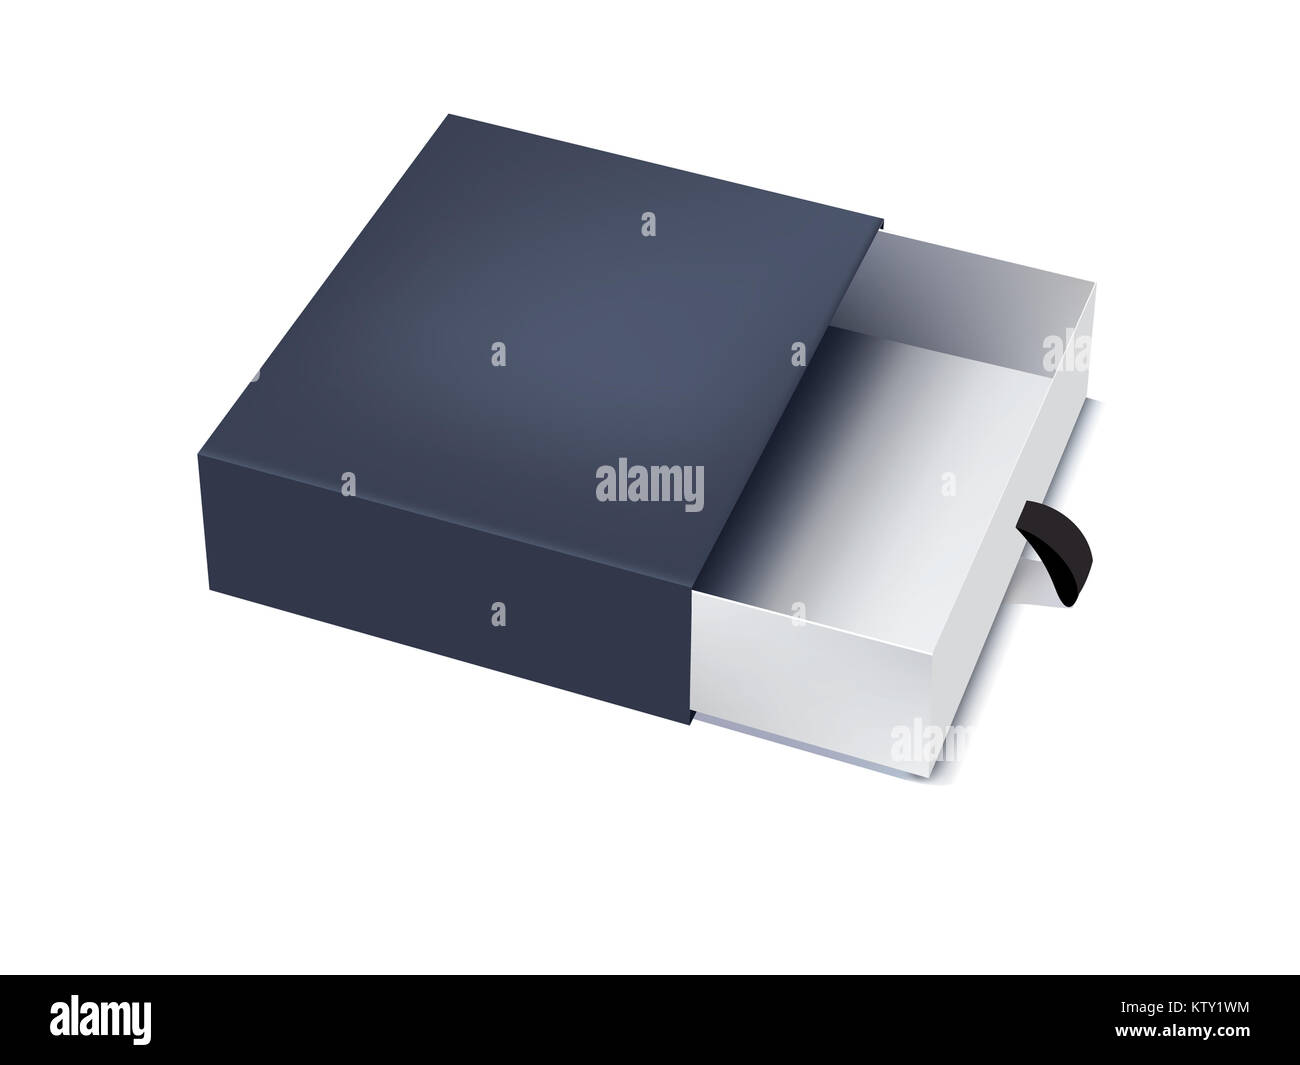 https://c8.alamy.com/comp/KTY1WM/packaging-boxes-with-different-sizes-on-white-background-KTY1WM.jpg